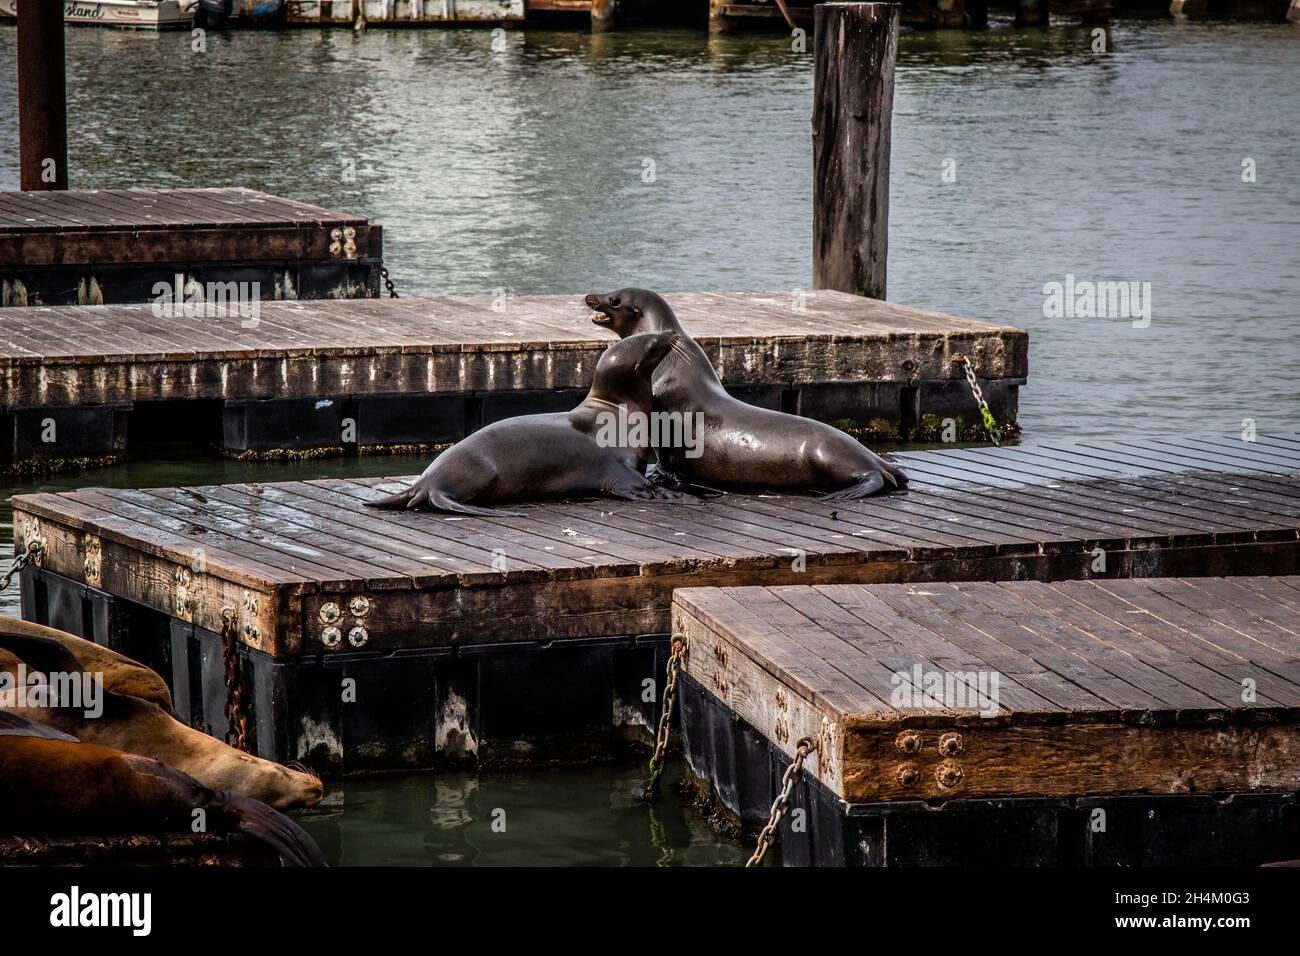 The Sea Lions at Pier 39 in San Francisco Stock Photo